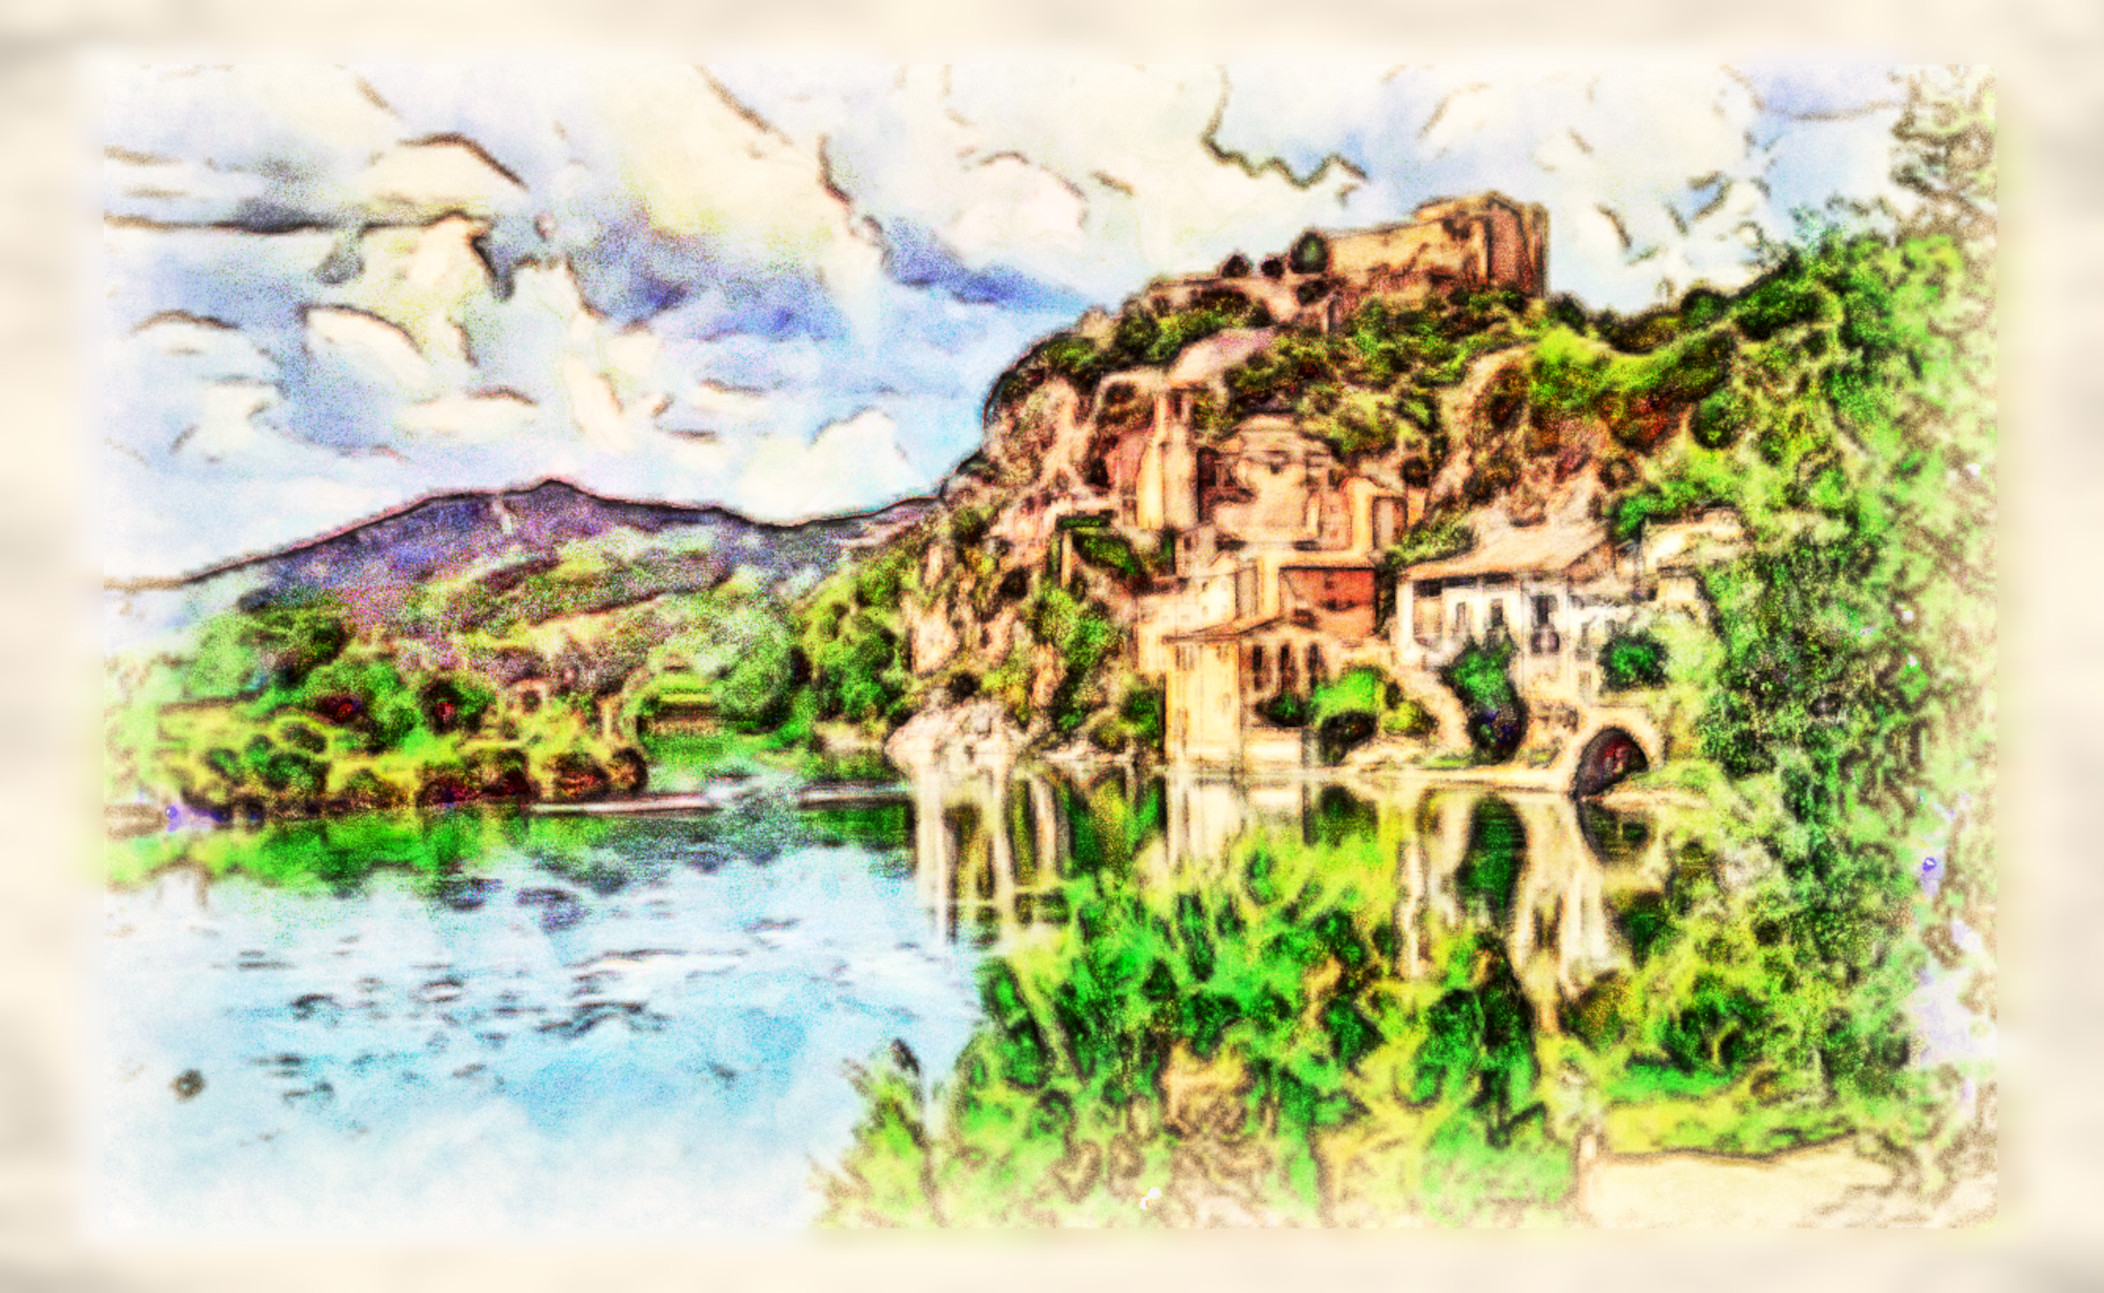 2023-10-04 18-21-23 miravet___riu_ebre__poble_i_castell_by_jobove_reus_df566g7 with a Watercolor Pastels Effect 2023 (4.0,75.0,32.0,50.0,10.0,8.0,75.0,True,0).jpg